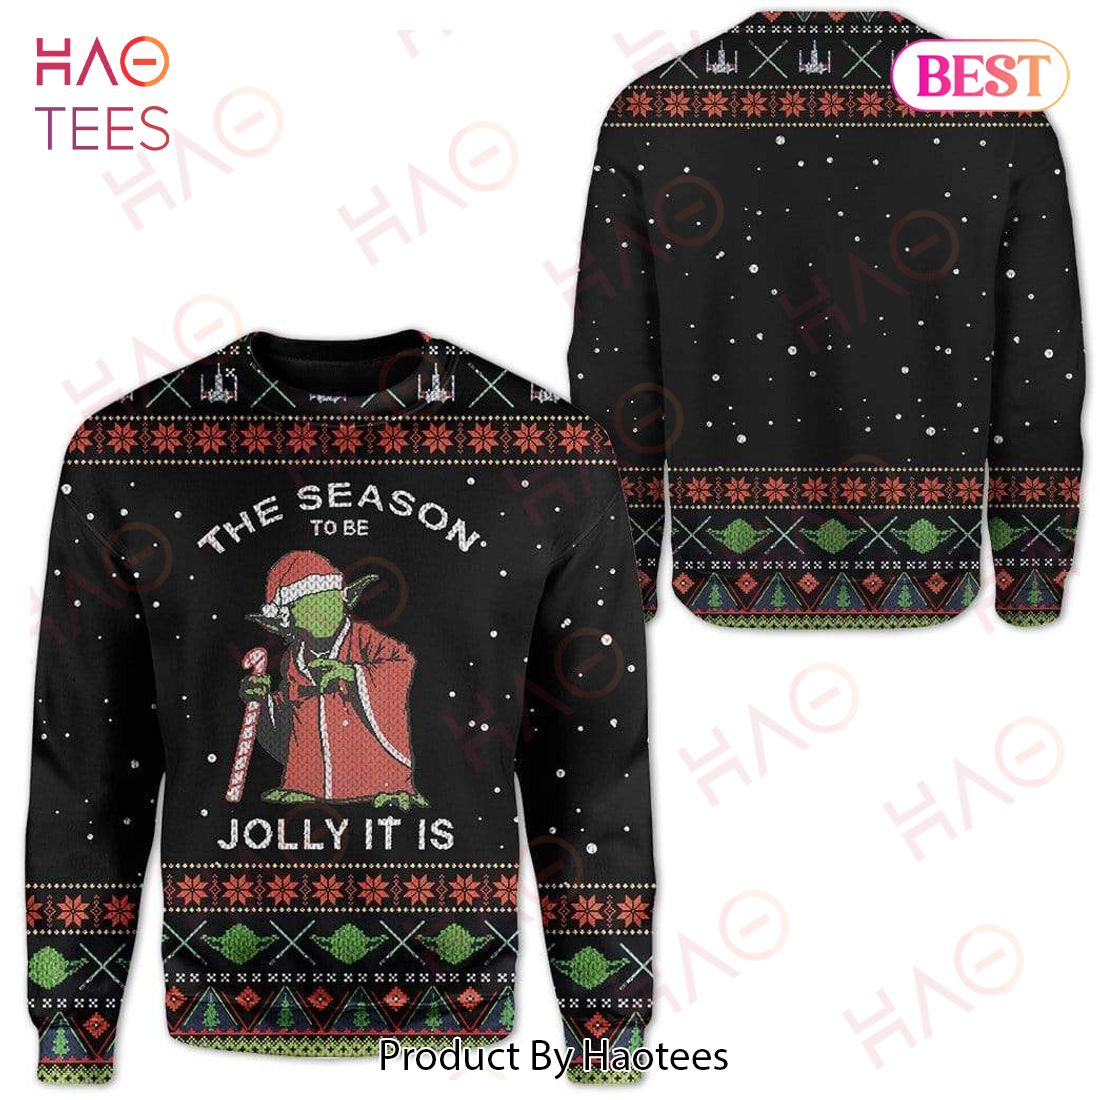 SW Sweater The Season To Be Jolly It Is Yoda Black Ugly Sweater 2022